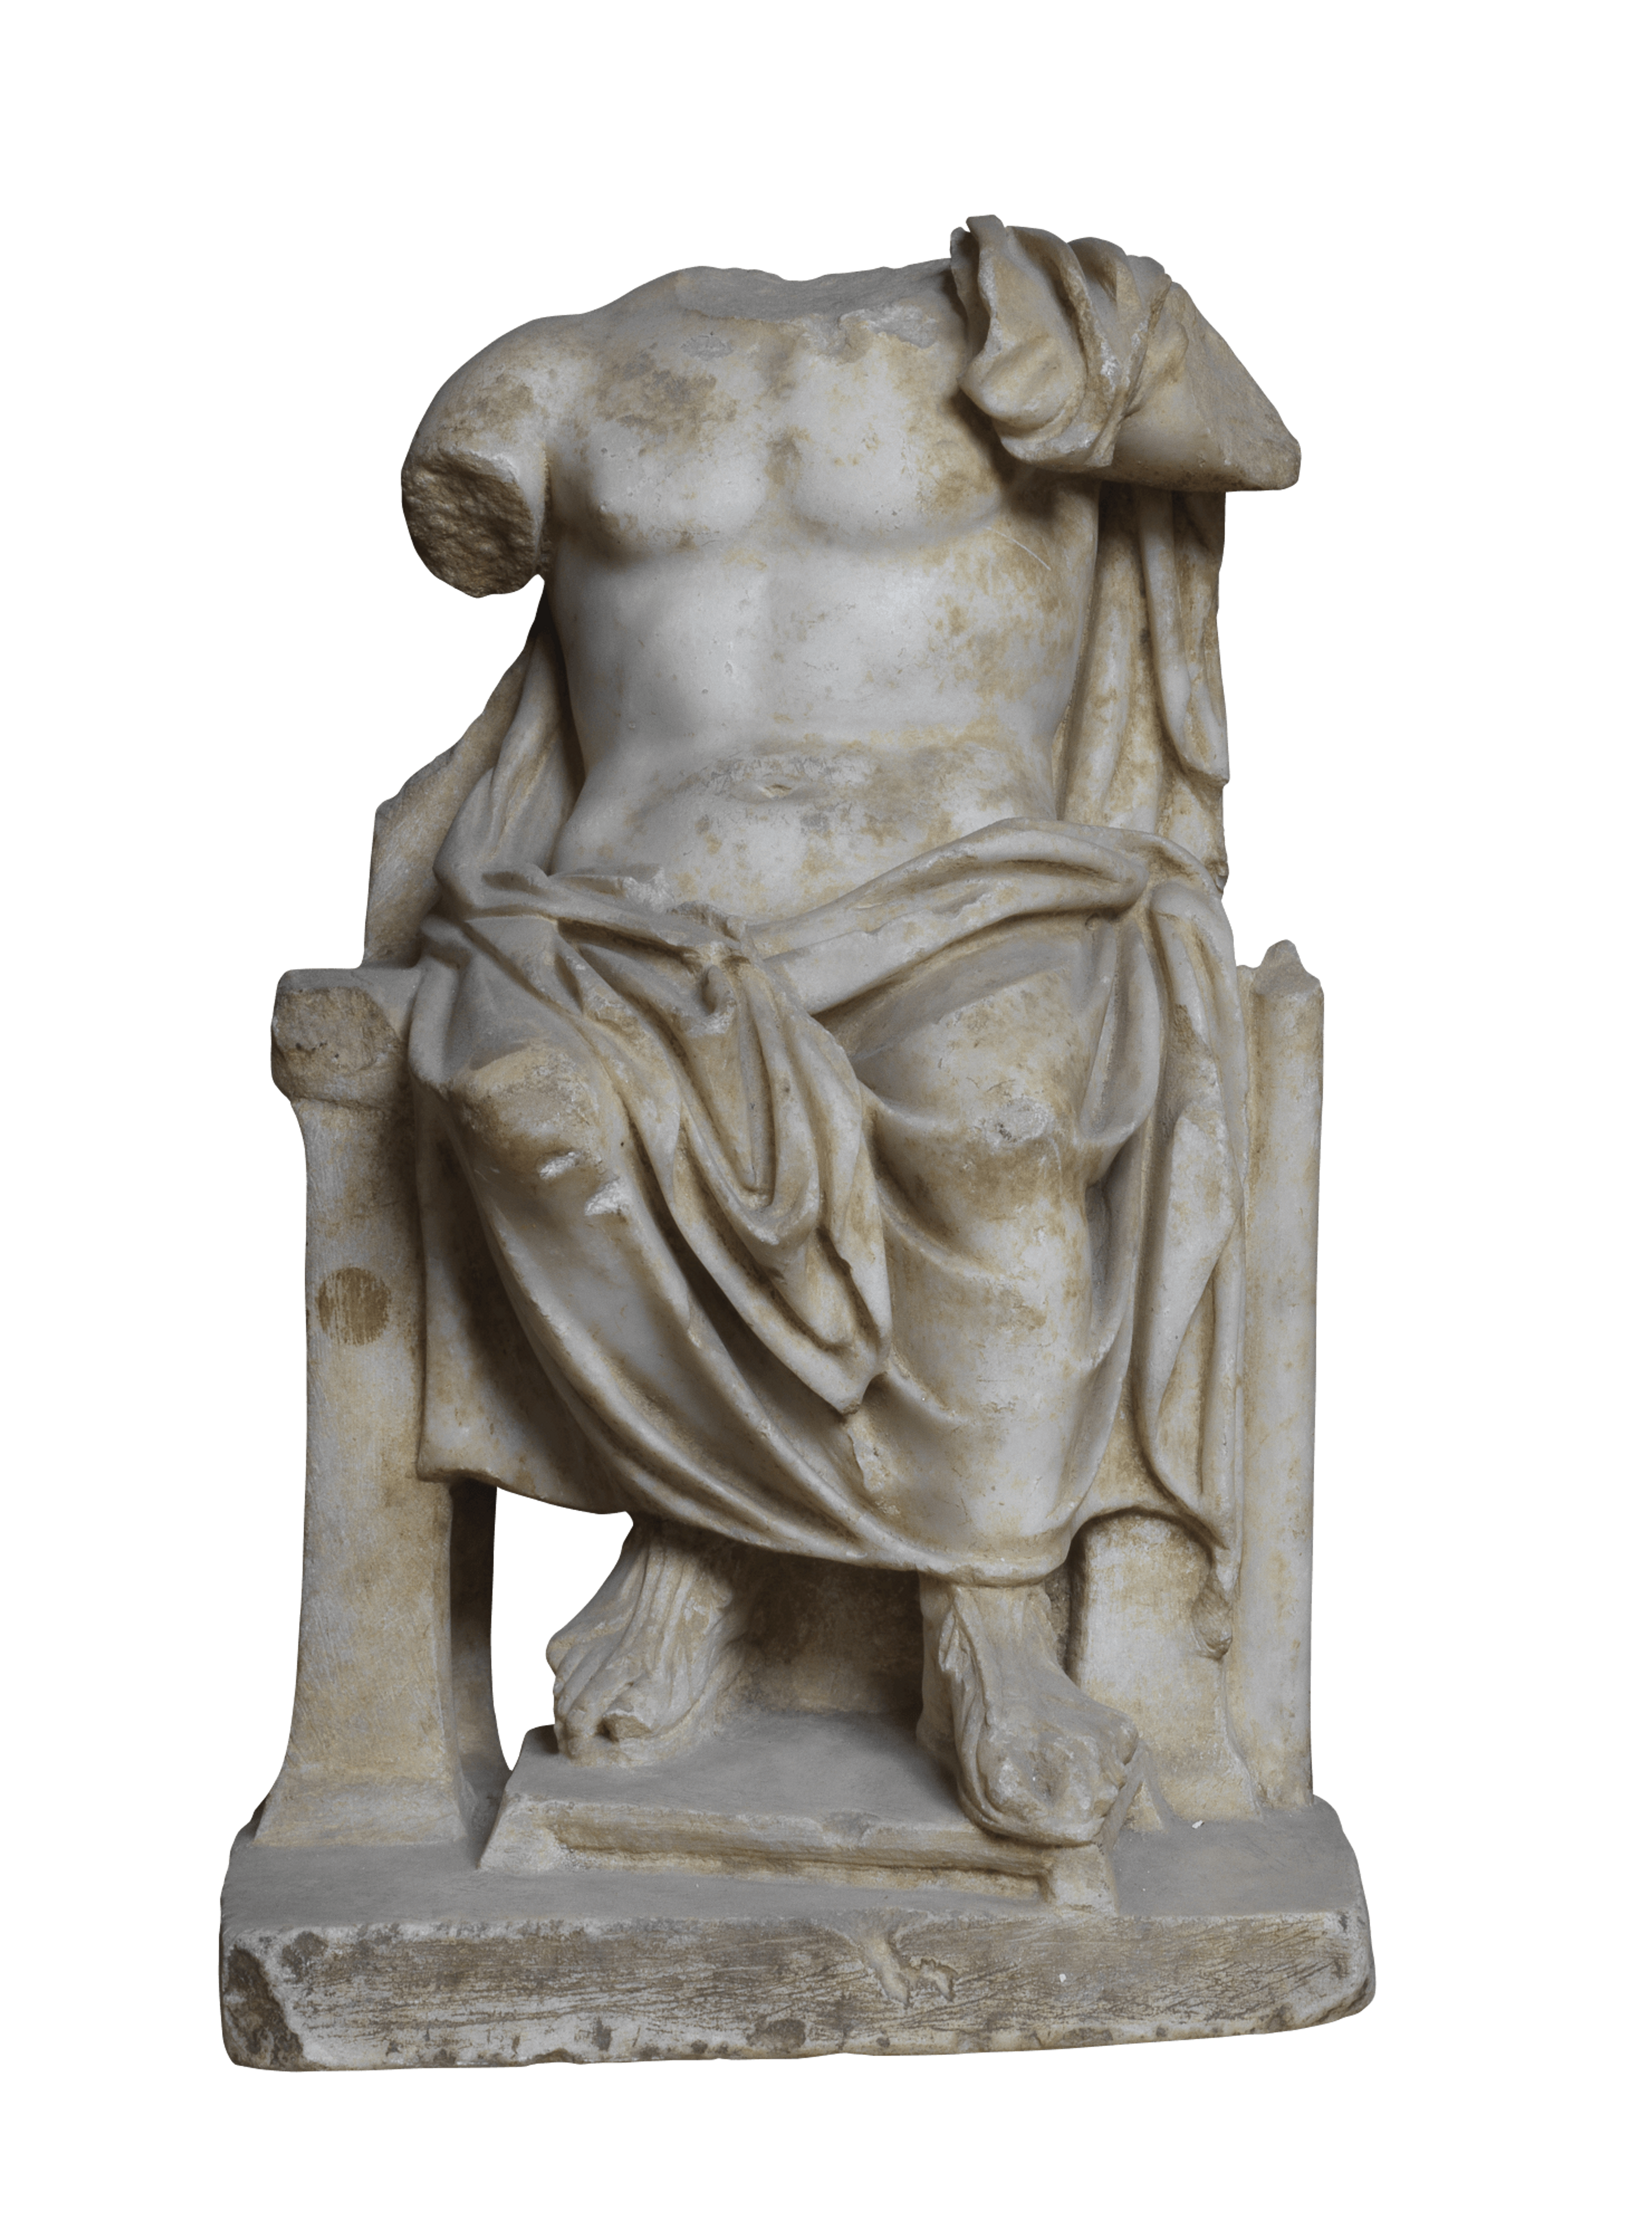 Headless statue of Capitoline Jupiter enthroned